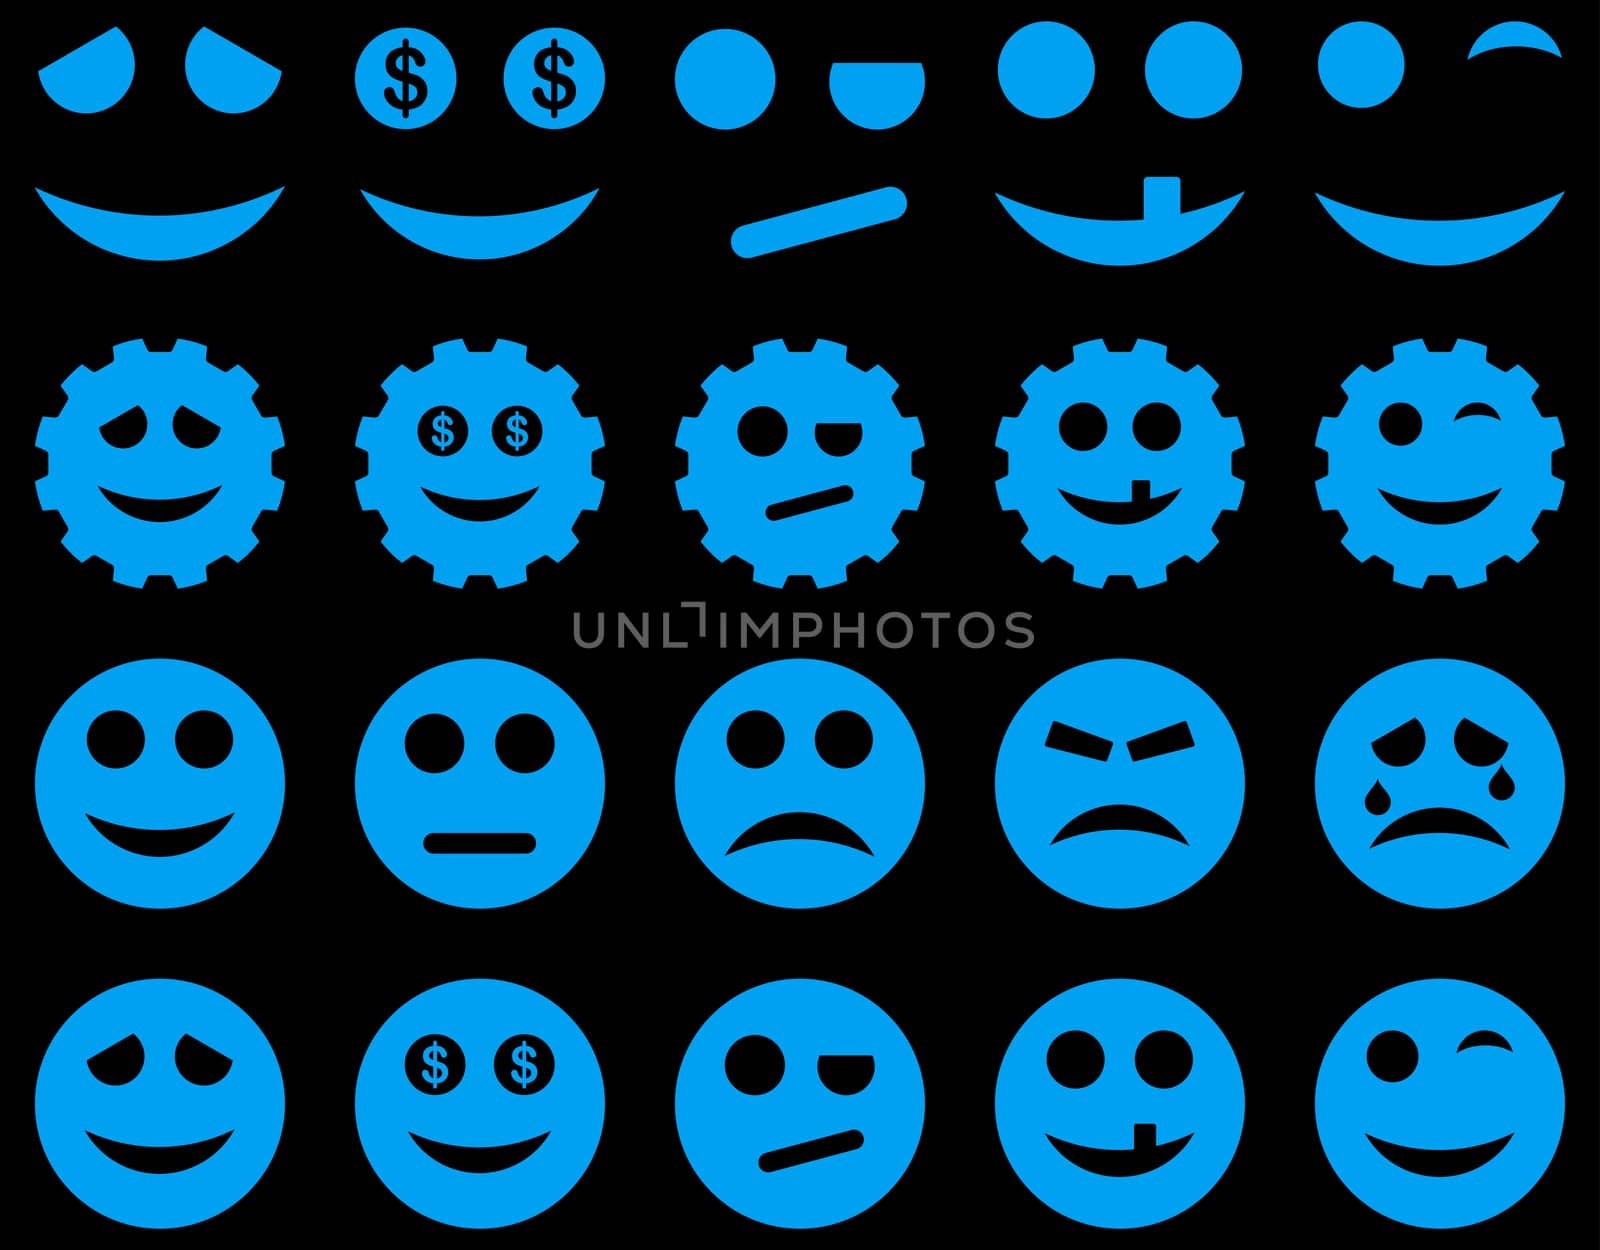 Tools, gears, smiles, emoticons icons. Glyph set style is flat images, blue symbols, isolated on a black background.